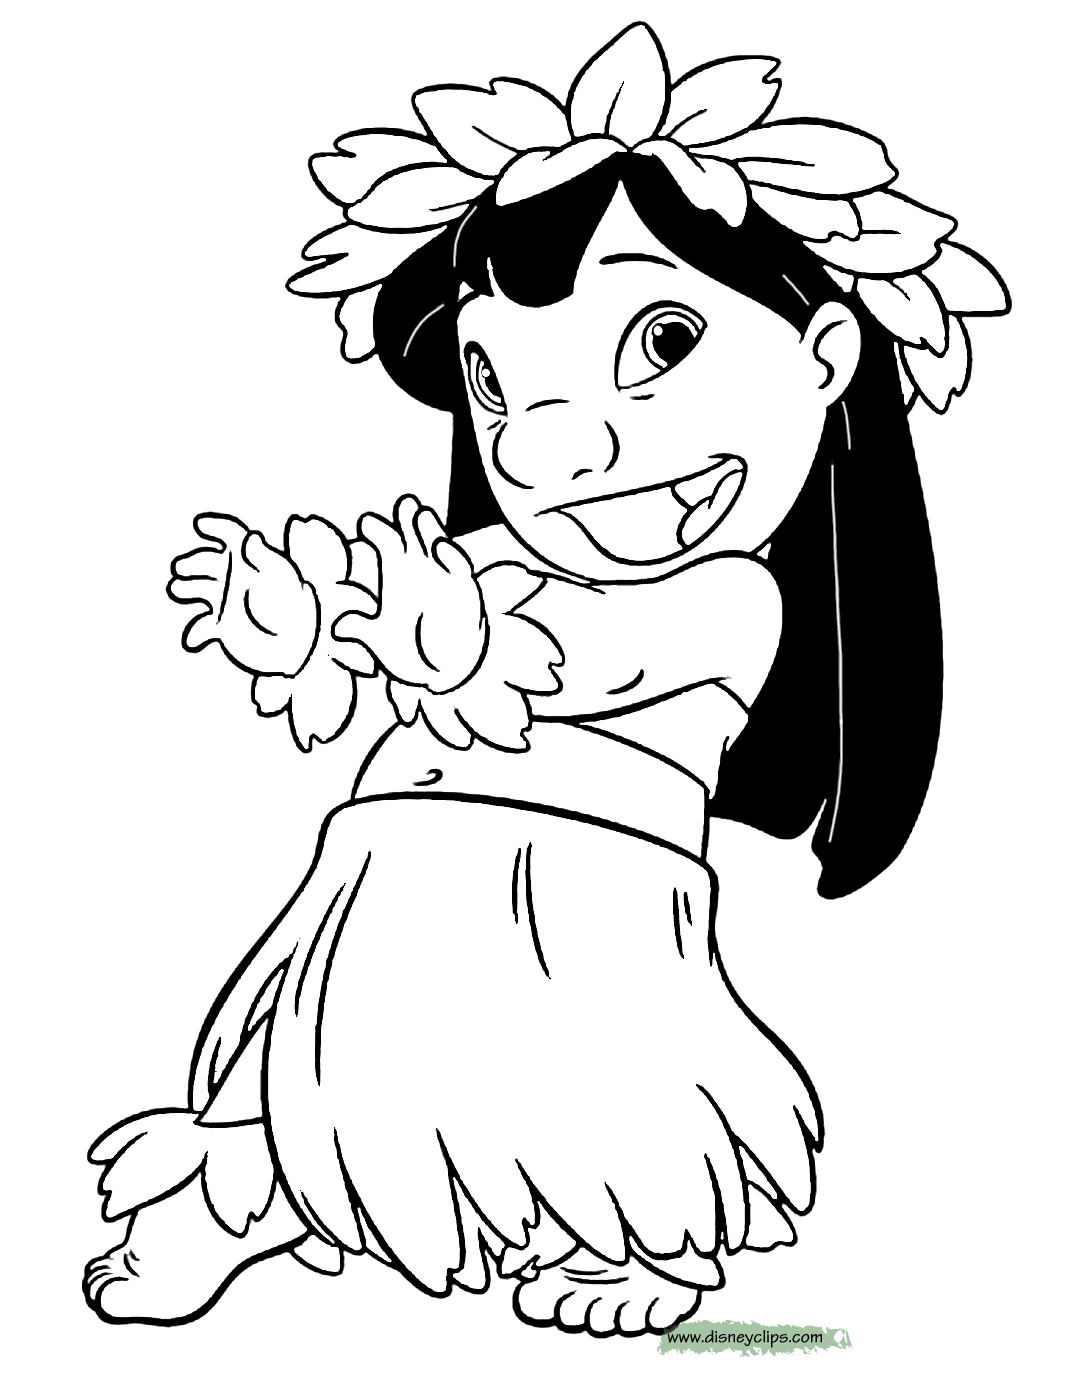 Download Lilo and Stitch Printable Coloring Pages 2 | Disney ...